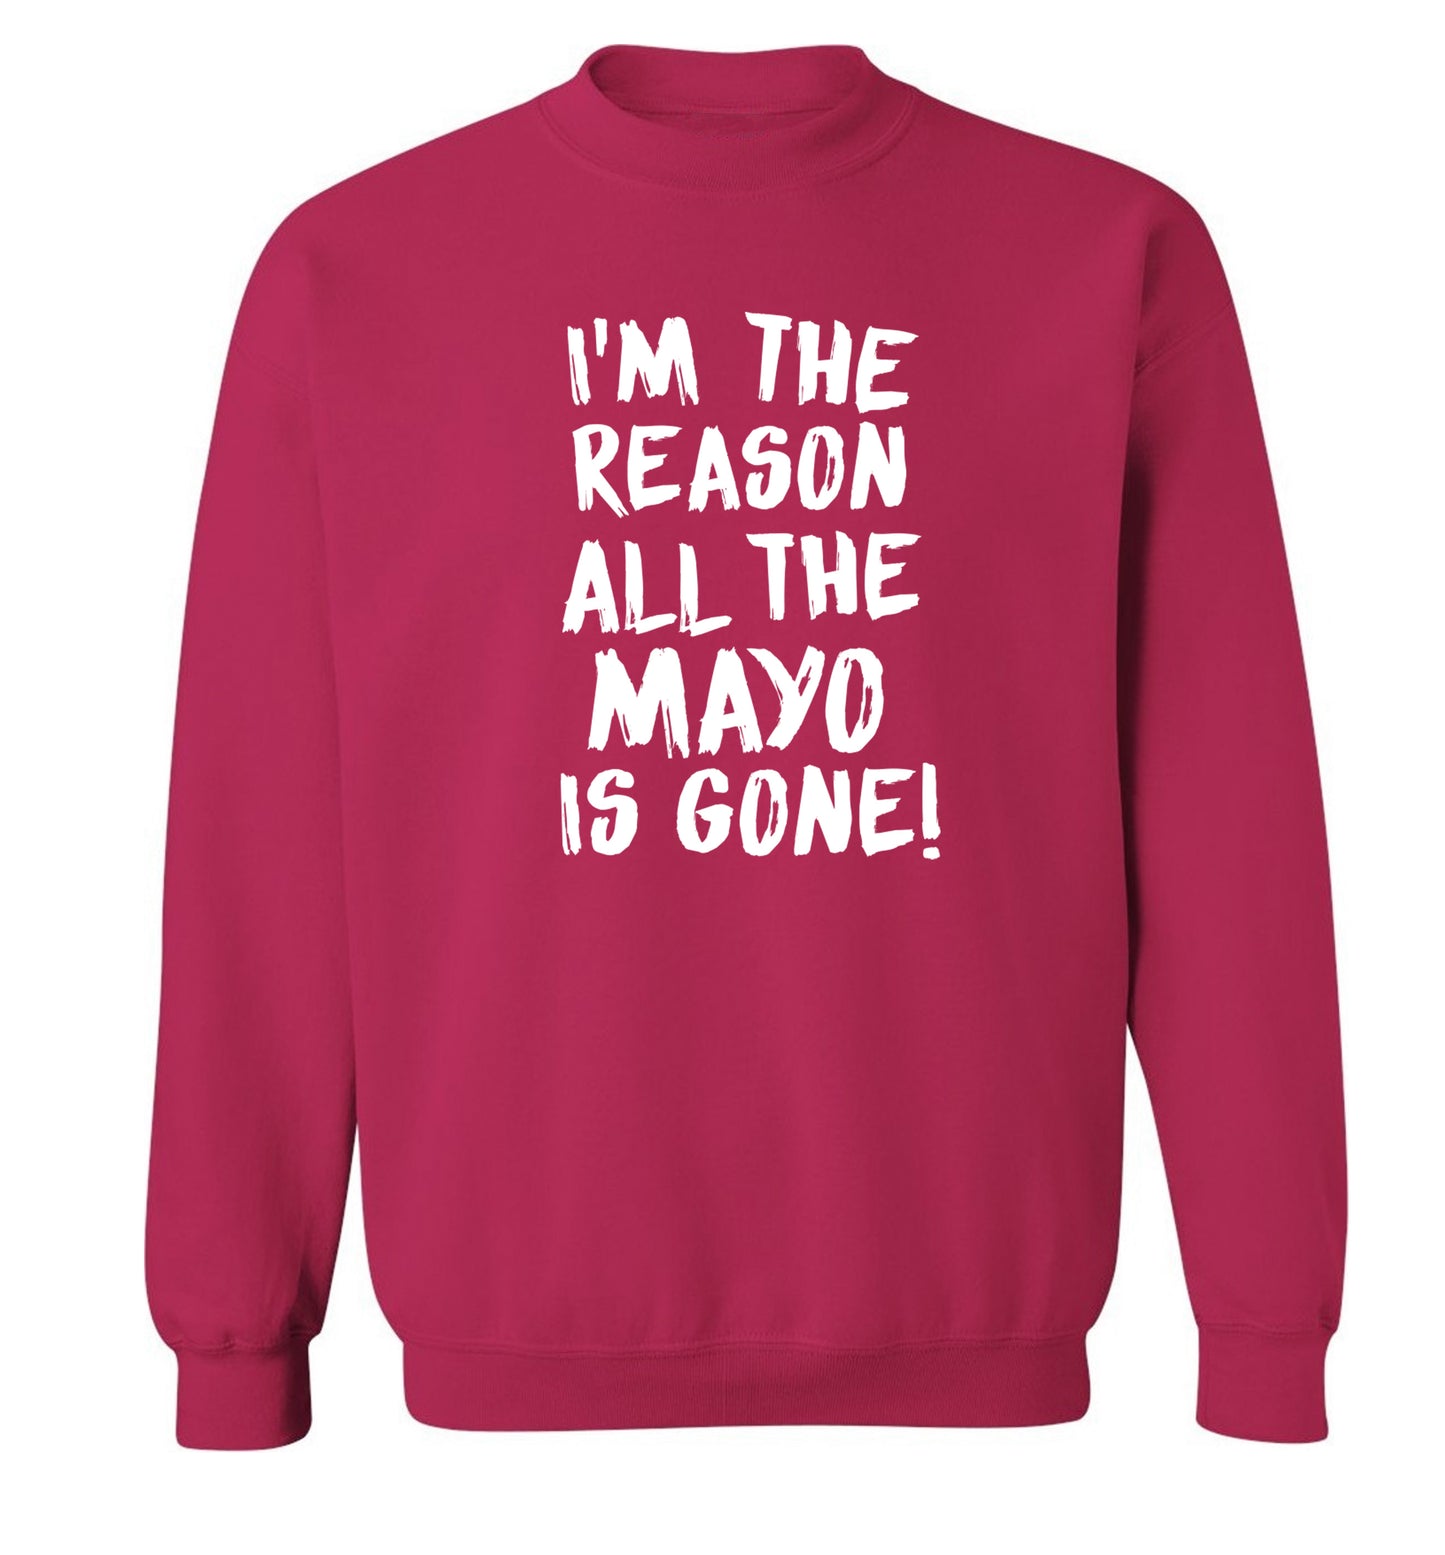 I'm the reason why all the mayo is gone Adult's unisex pink Sweater 2XL